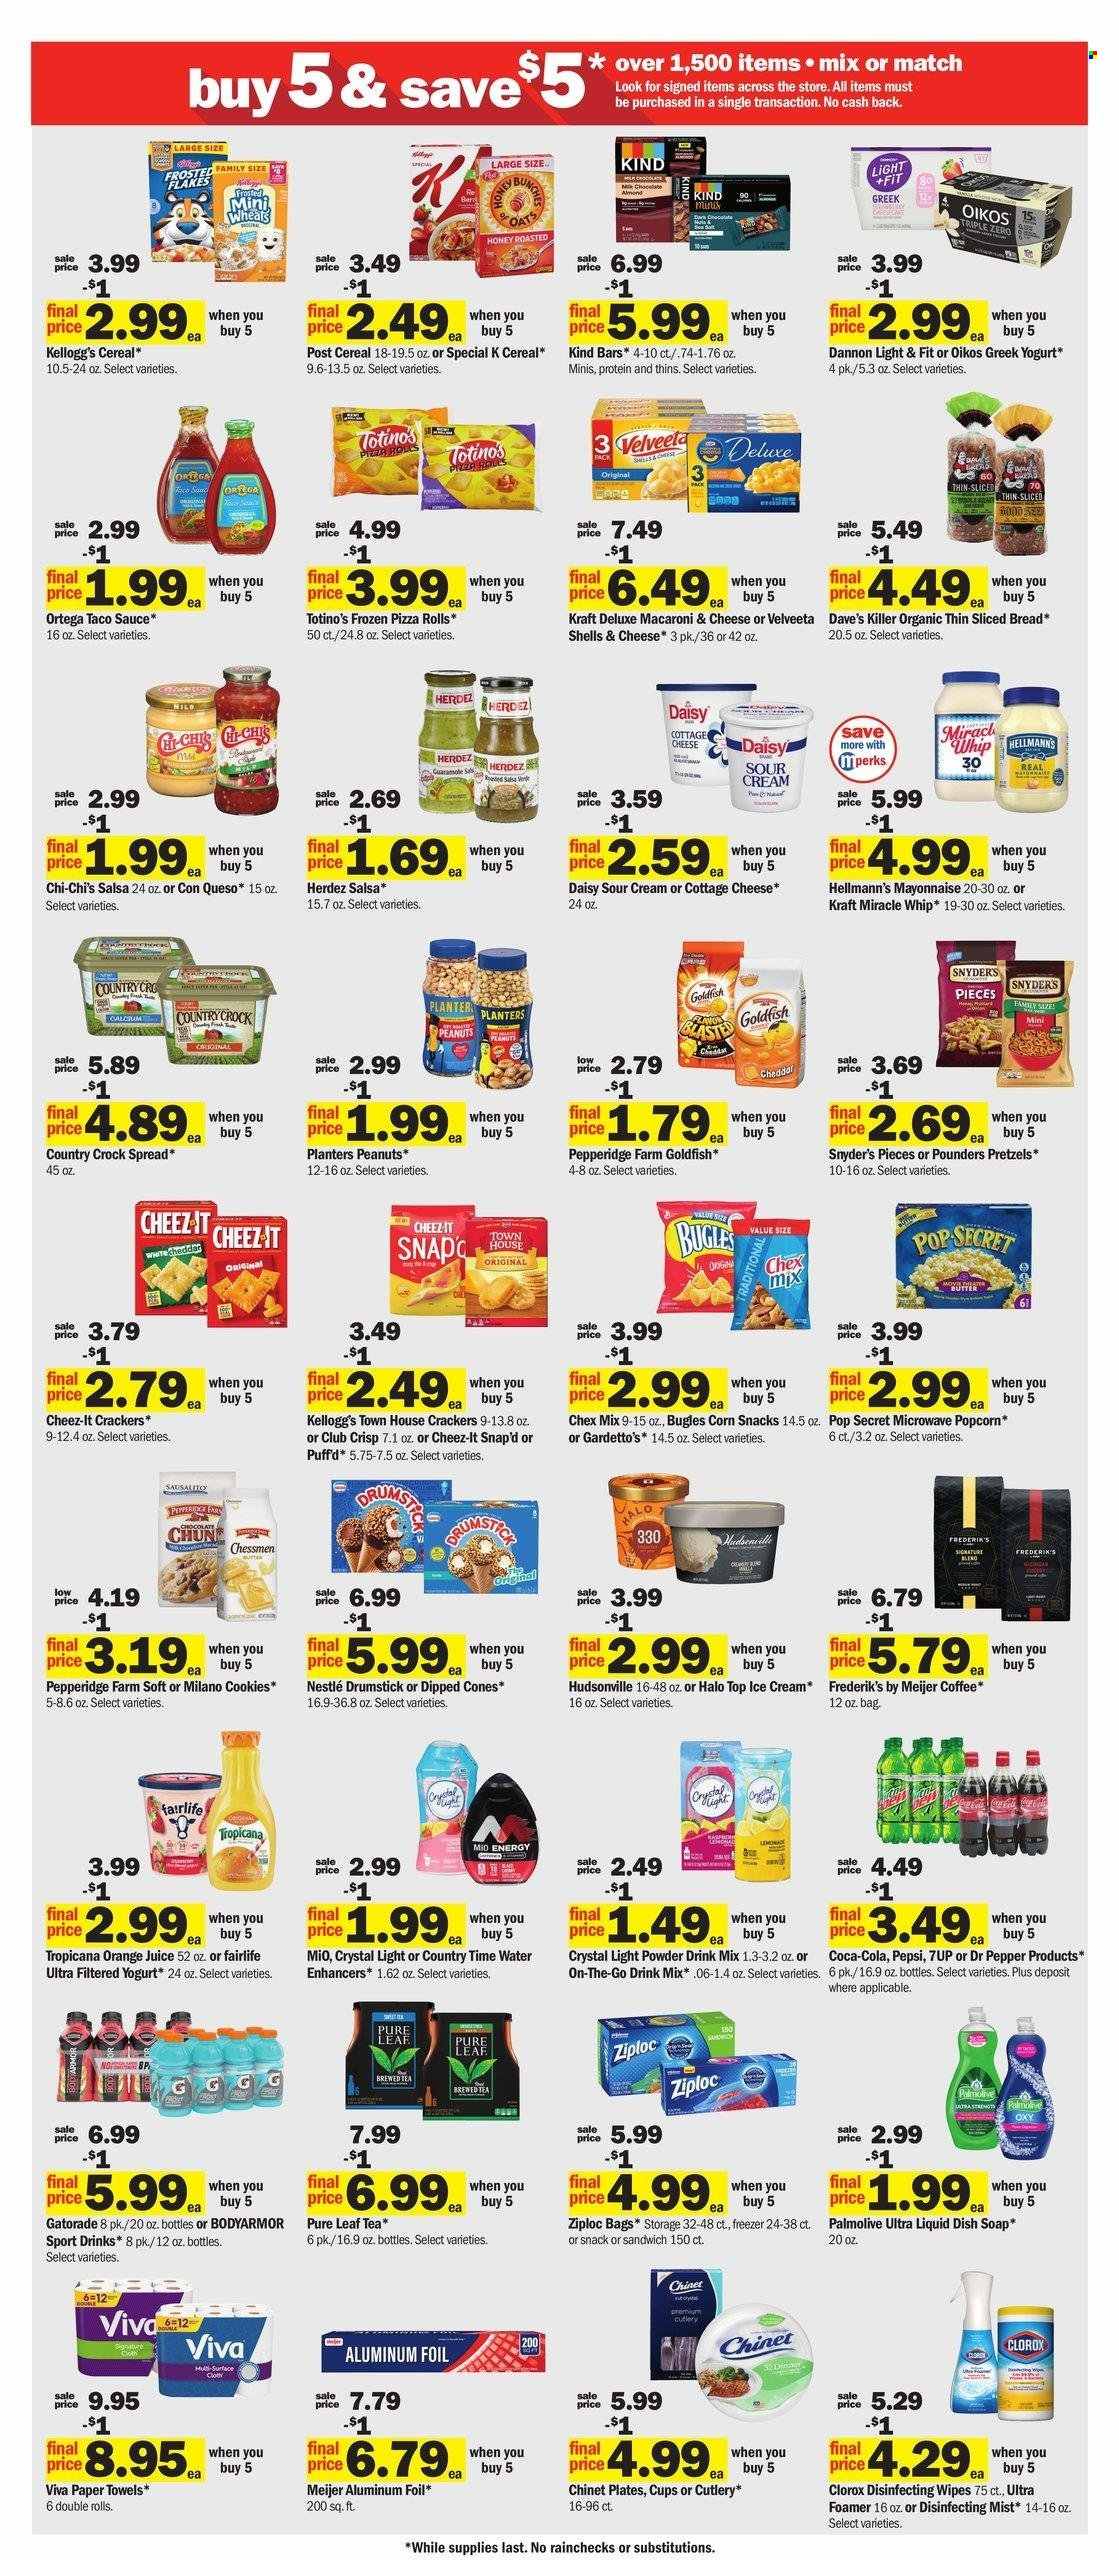 thumbnail - Meijer Flyer - 05/28/2023 - 06/03/2023 - Sales products - Trust, brioche, tuna, pizza, Bumble Bee, sauce, Lunchables, Kraft®, snack, Oscar Mayer, cheddar, cheese, almond milk, milk, Silk, creamer, almond creamer, ice cream, Hershey's, Nestlé, Kellogg's, Chex Mix, oats, cereals, Rice Krispies, Honey Maid, Nature Valley, BBQ sauce, caramel, ragu, chicken, Jet, oven, Bumblebee, grill, greek yoghurt, yoghurt, Oikos, Dannon, taco sauce, pizza rolls, macaroni & cheese, ready meal, bread, salsa, cottage cheese, sour cream, mayonnaise, Miracle Whip, Hellmann’s, peanuts, Planters, Goldfish, salty snack, pretzels, crackers, Cheez-It, maize snack, popcorn, cookies, ice cones, coffee, orange juice, juice, syrup, Country Time, powder drink, Coca-Cola, Pepsi, Dr. Pepper, soft drink, 7UP, Gatorade, electrolyte drink, ice tea, Pure Leaf, bag, Ziploc, dishwashing liquid, Palmolive, kitchen towels, paper towels, aluminium foil, plate, cutlery set, cup, cleansing wipes, wipes, Clorox. Page 4.